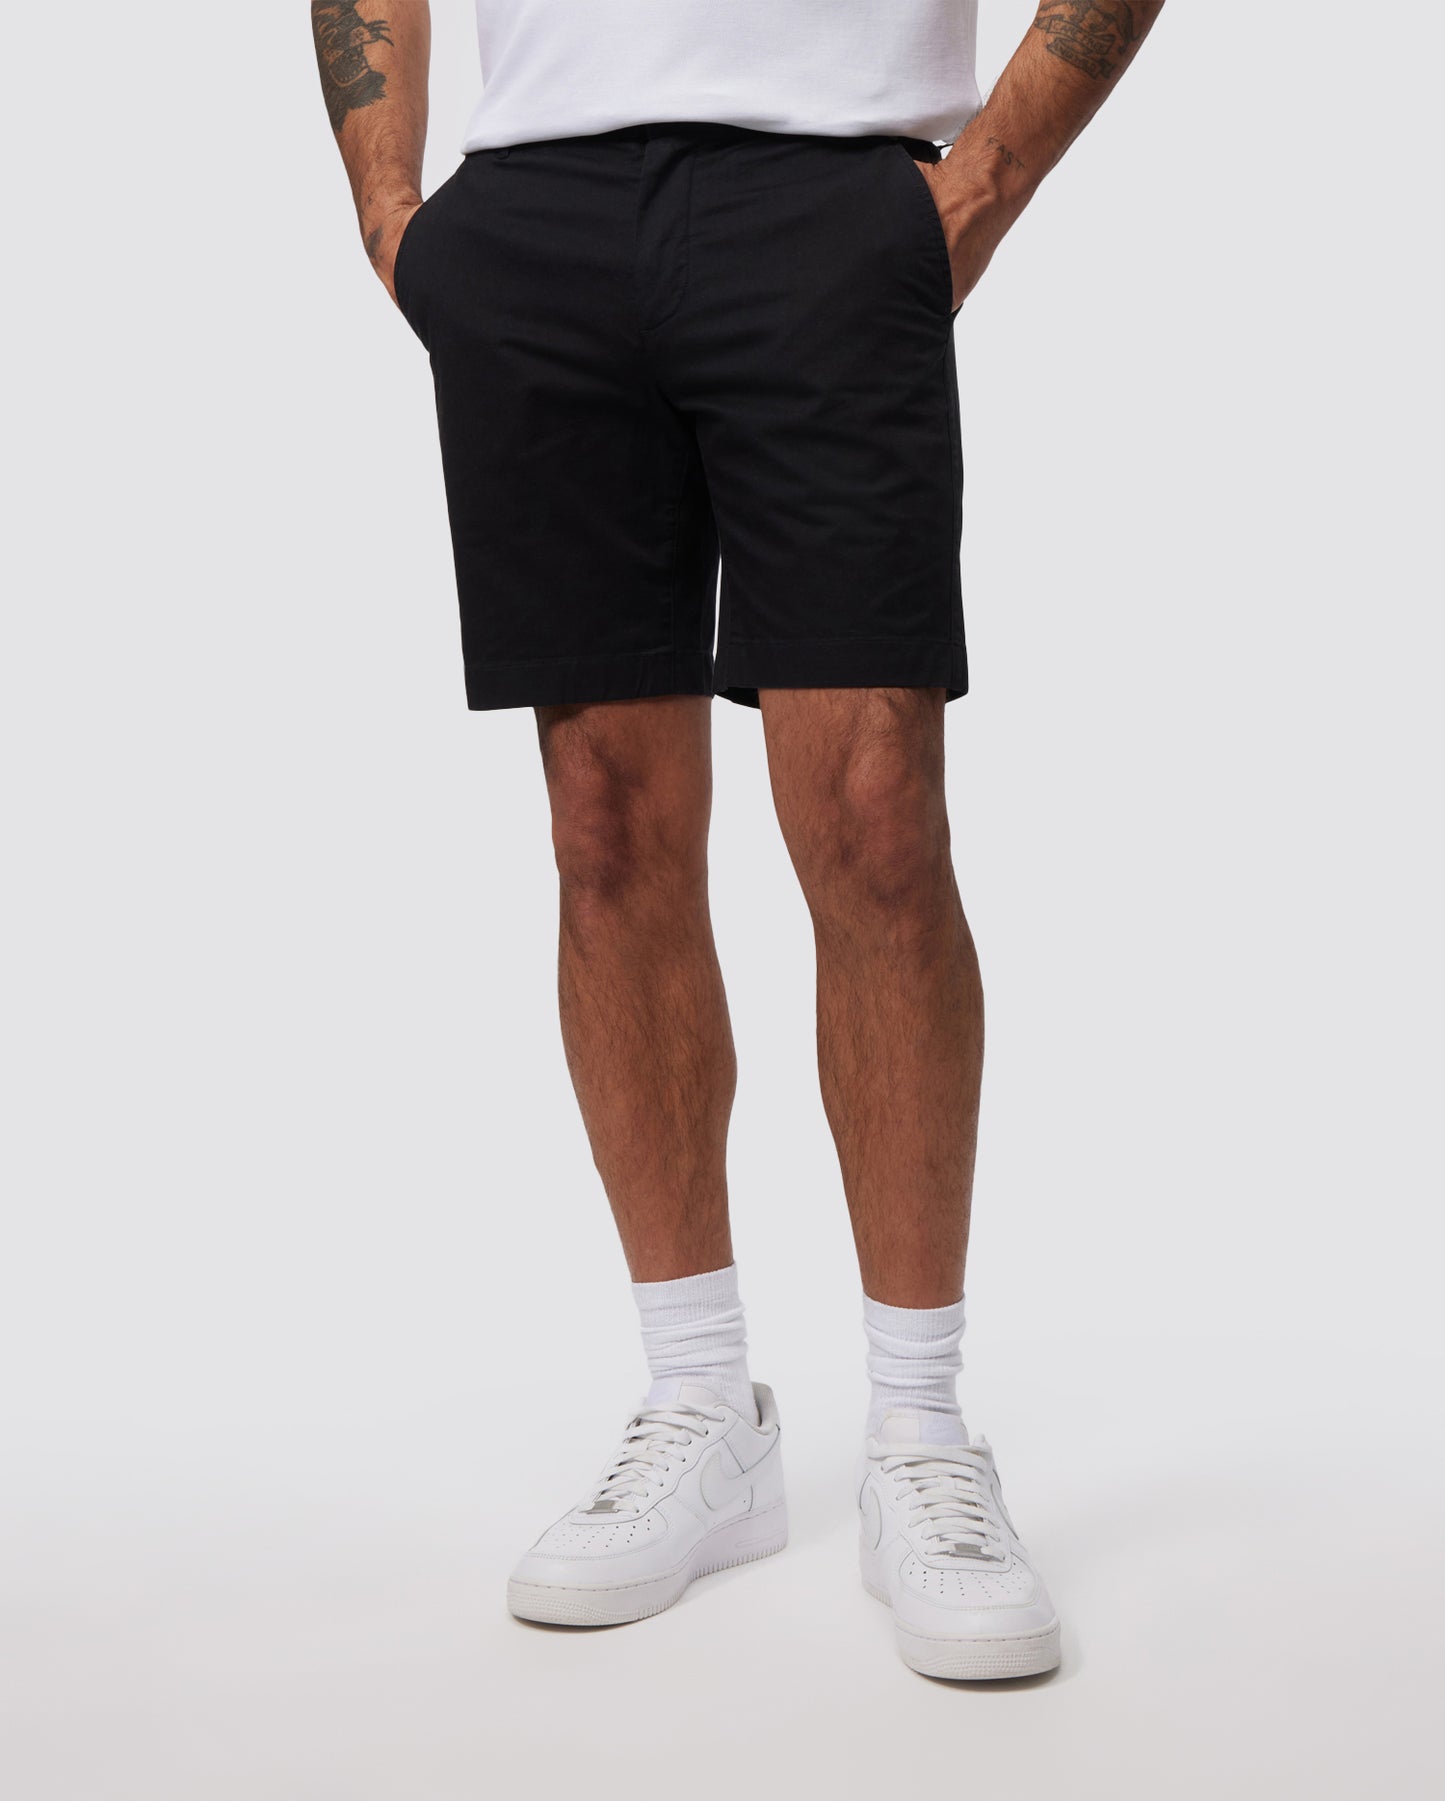 Shop the Best Golf Shorts for Men by Psycho Bunny